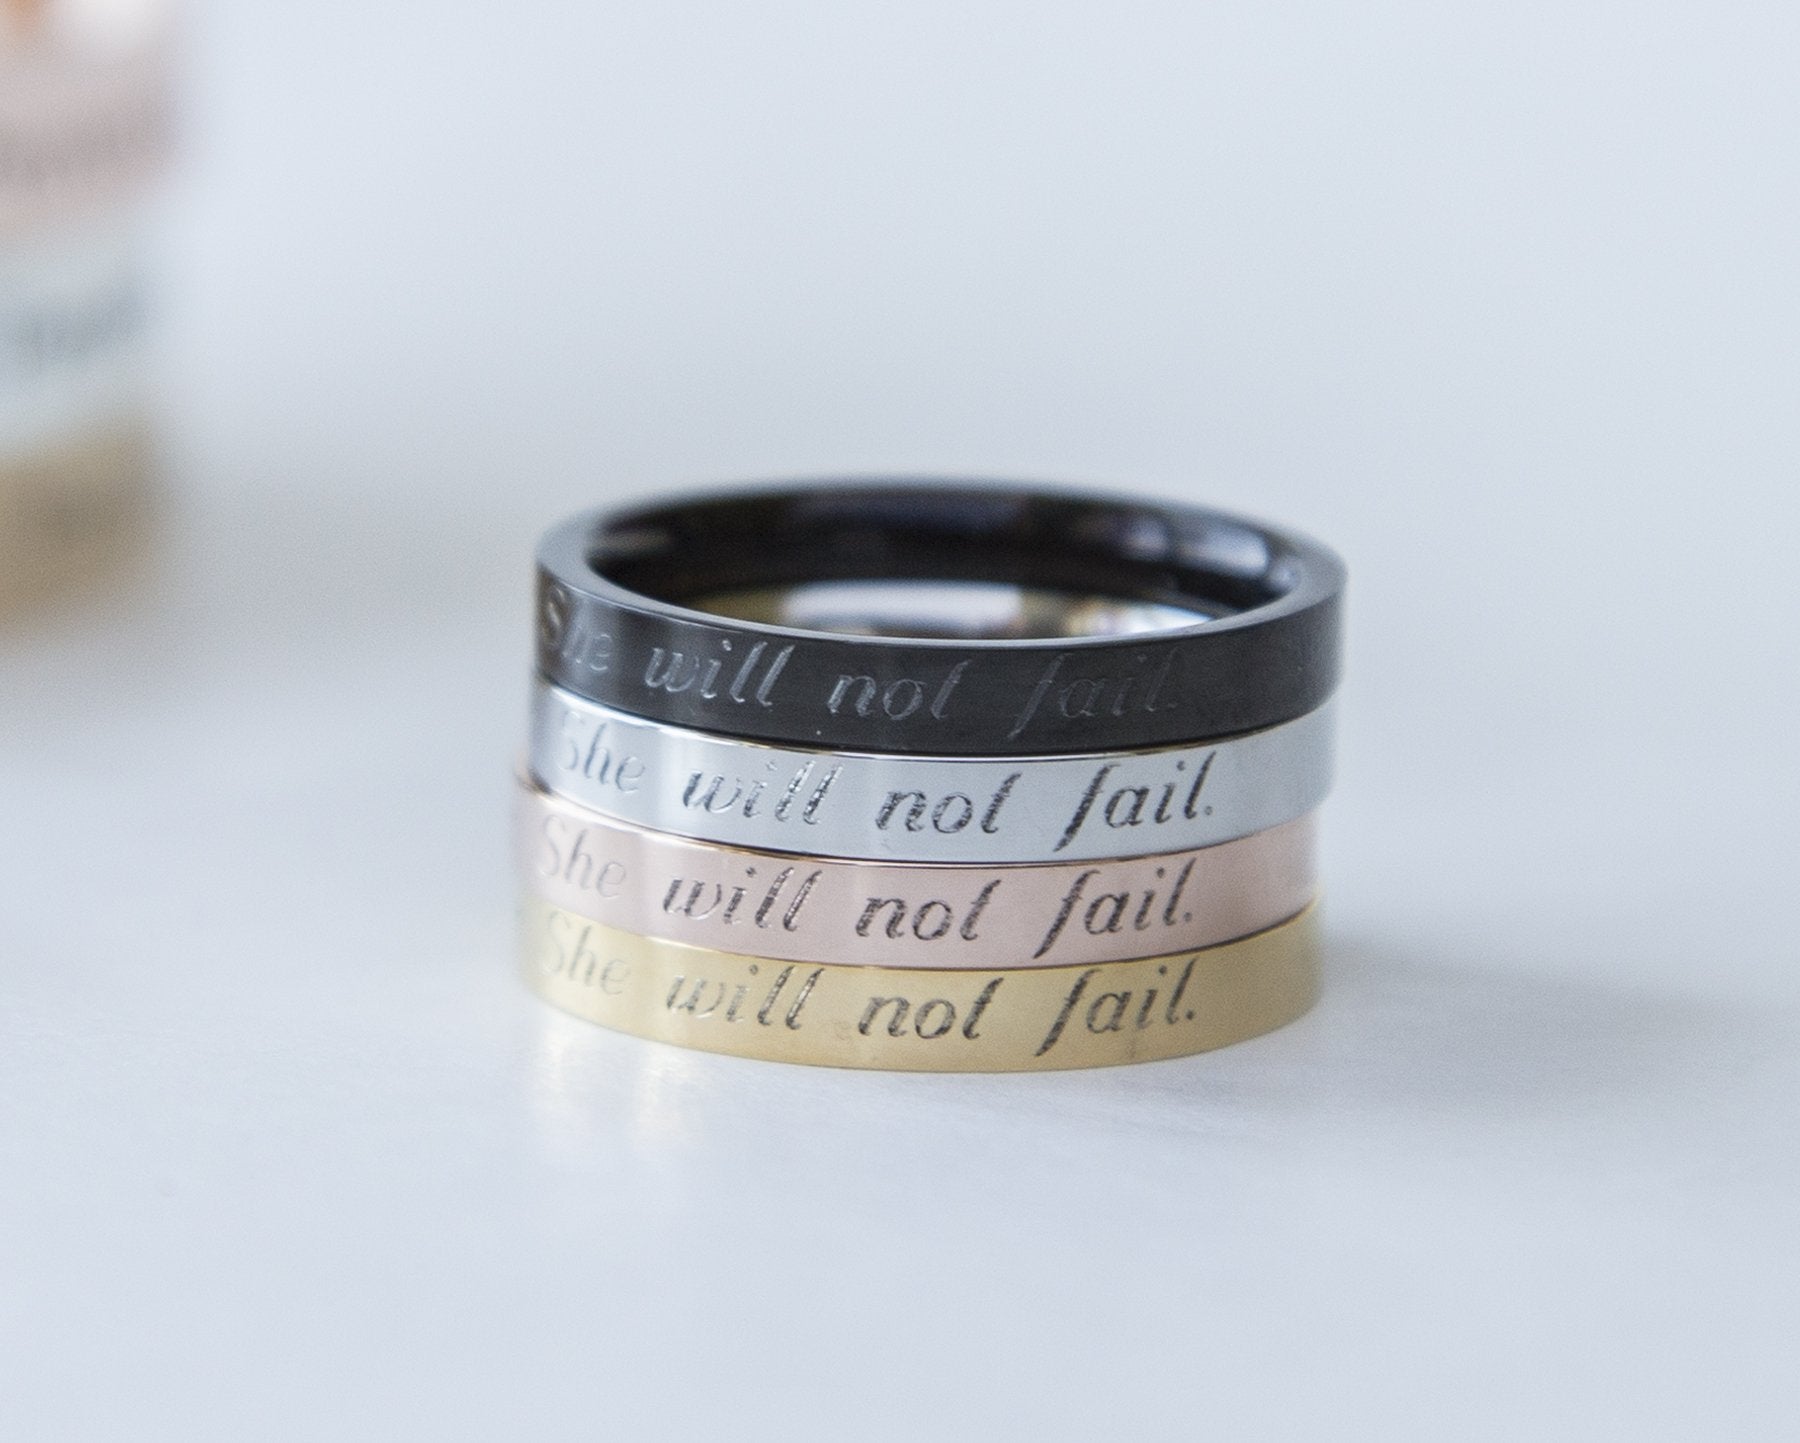 "Psalm 46:5 Engraved Ring - Stainless Steel with Gold, Rose Gold or Black Plating"
Keywords: Psalm 46:5, engraved ring, stainless steel, gold, rose gold, black plating. Bijou Her